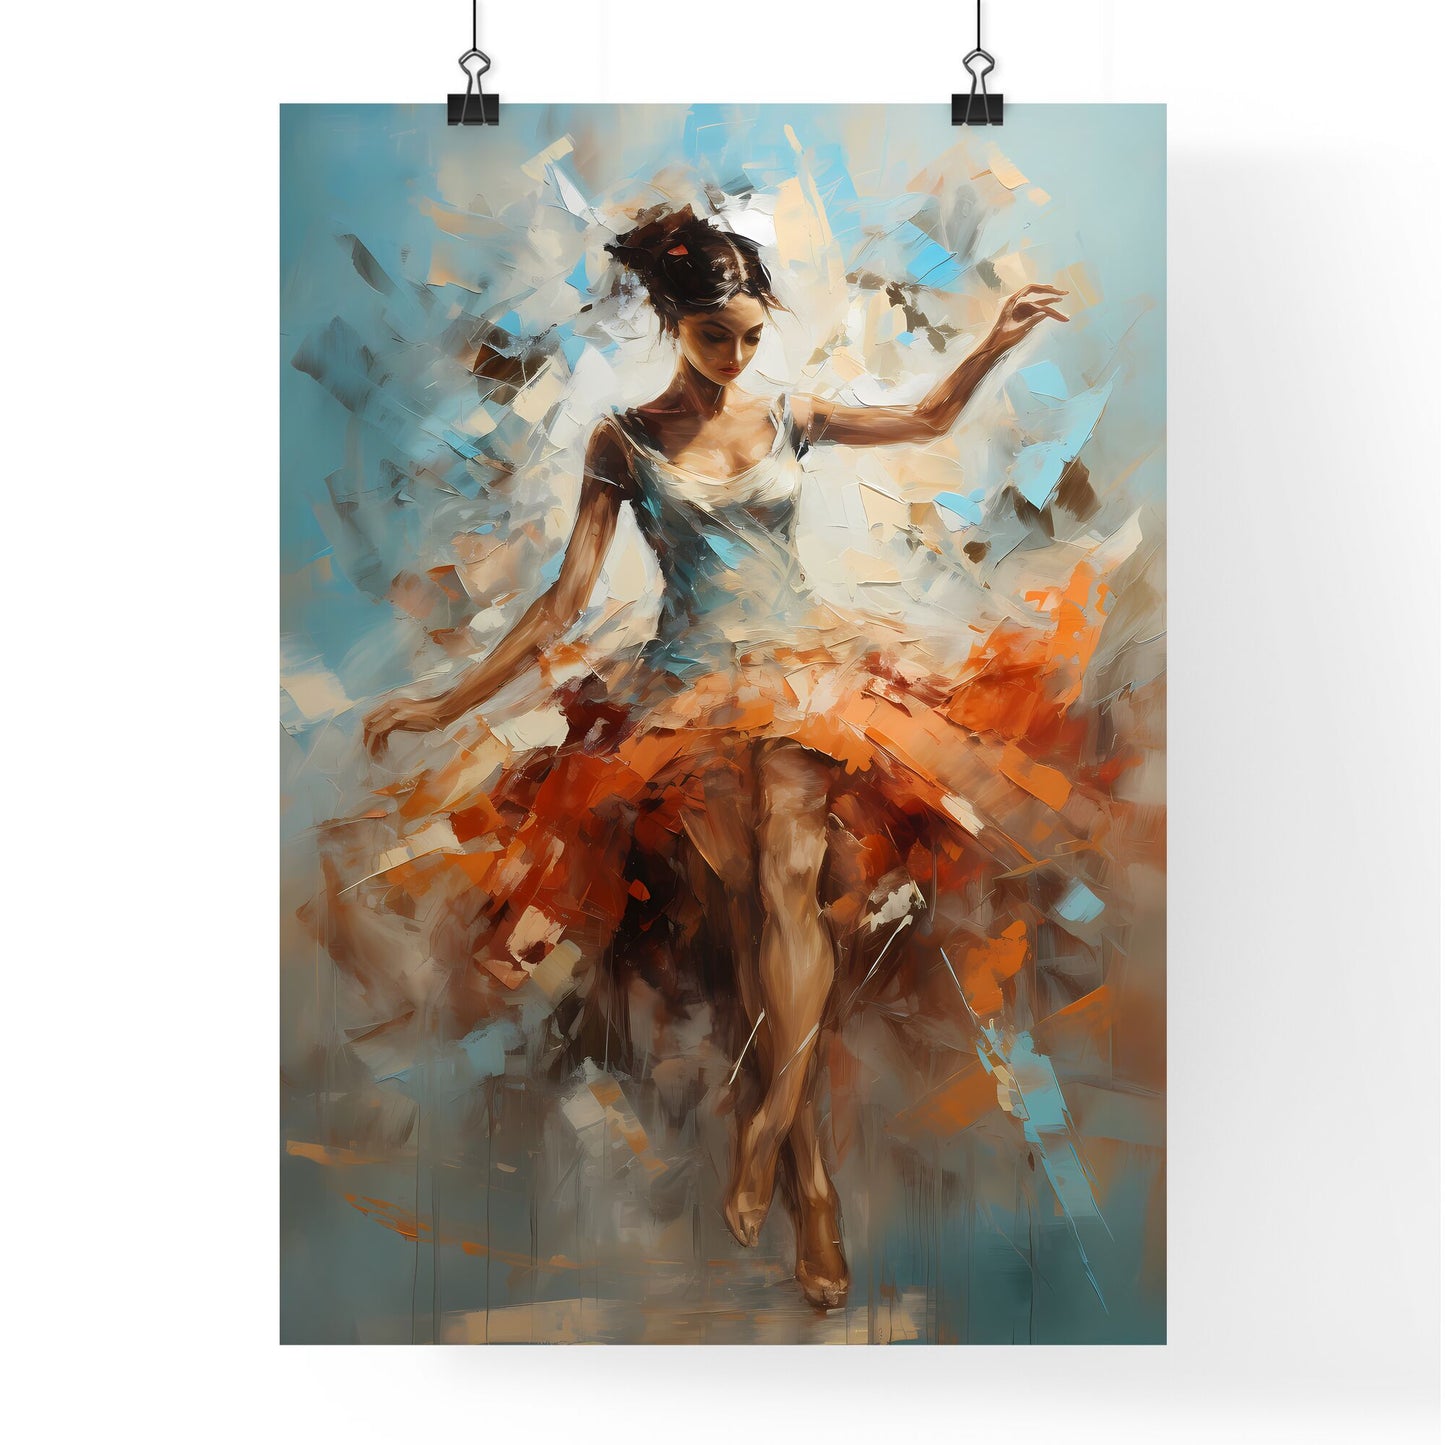 The Ballerina - A Painting Of A Woman In A Dress Default Title